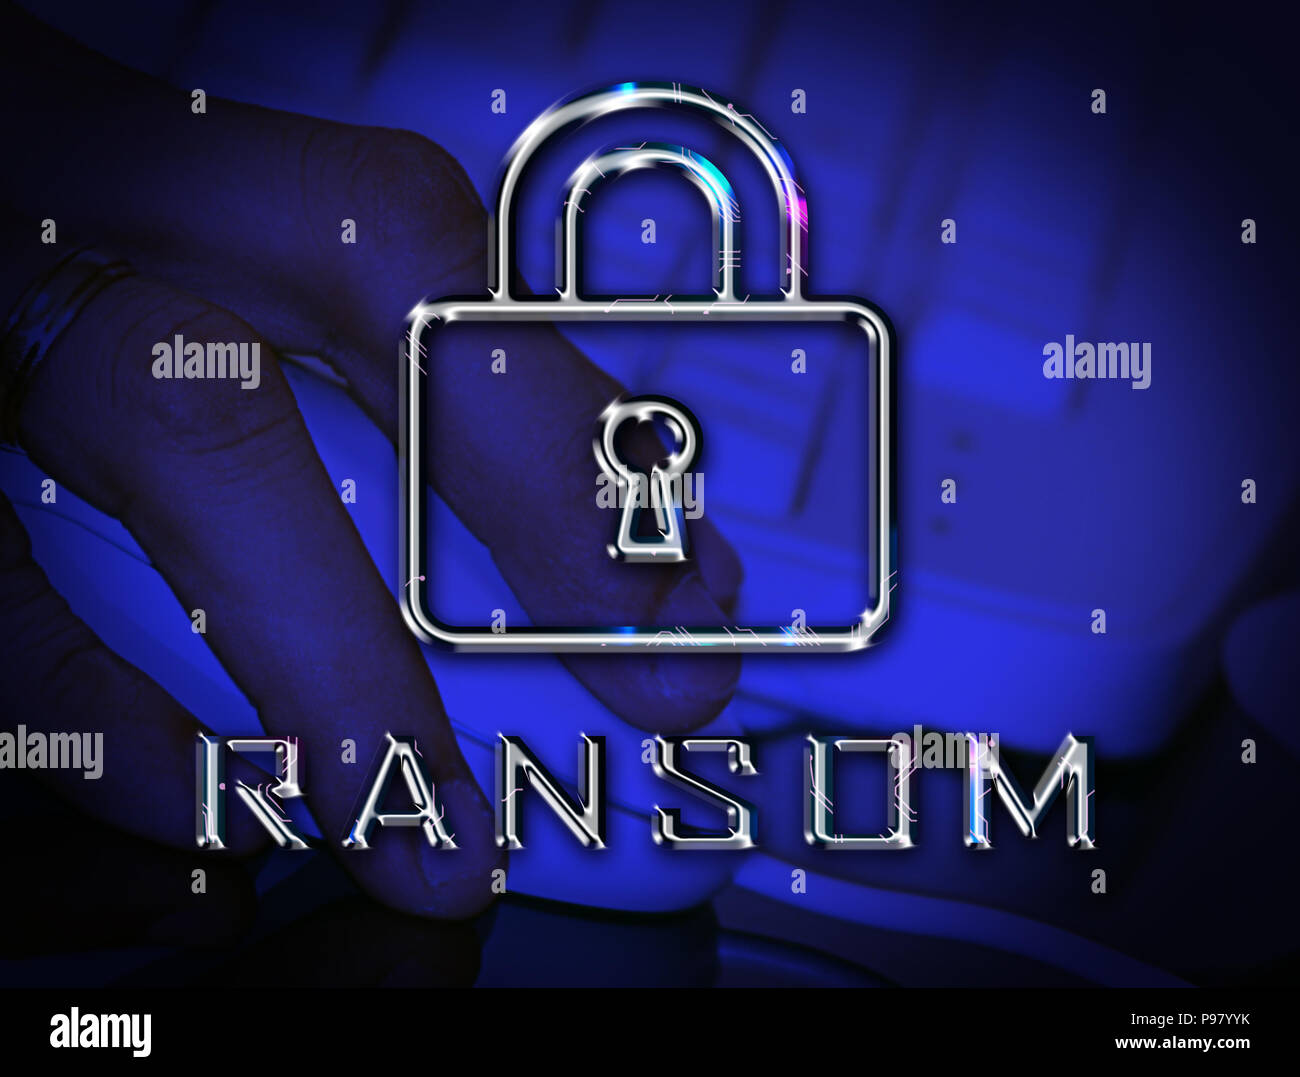 Ransom Computer Hacker Data Extortion 3d Illustration Shows Ransomware Used To Attack Computer Data And Blackmail Stock Photo